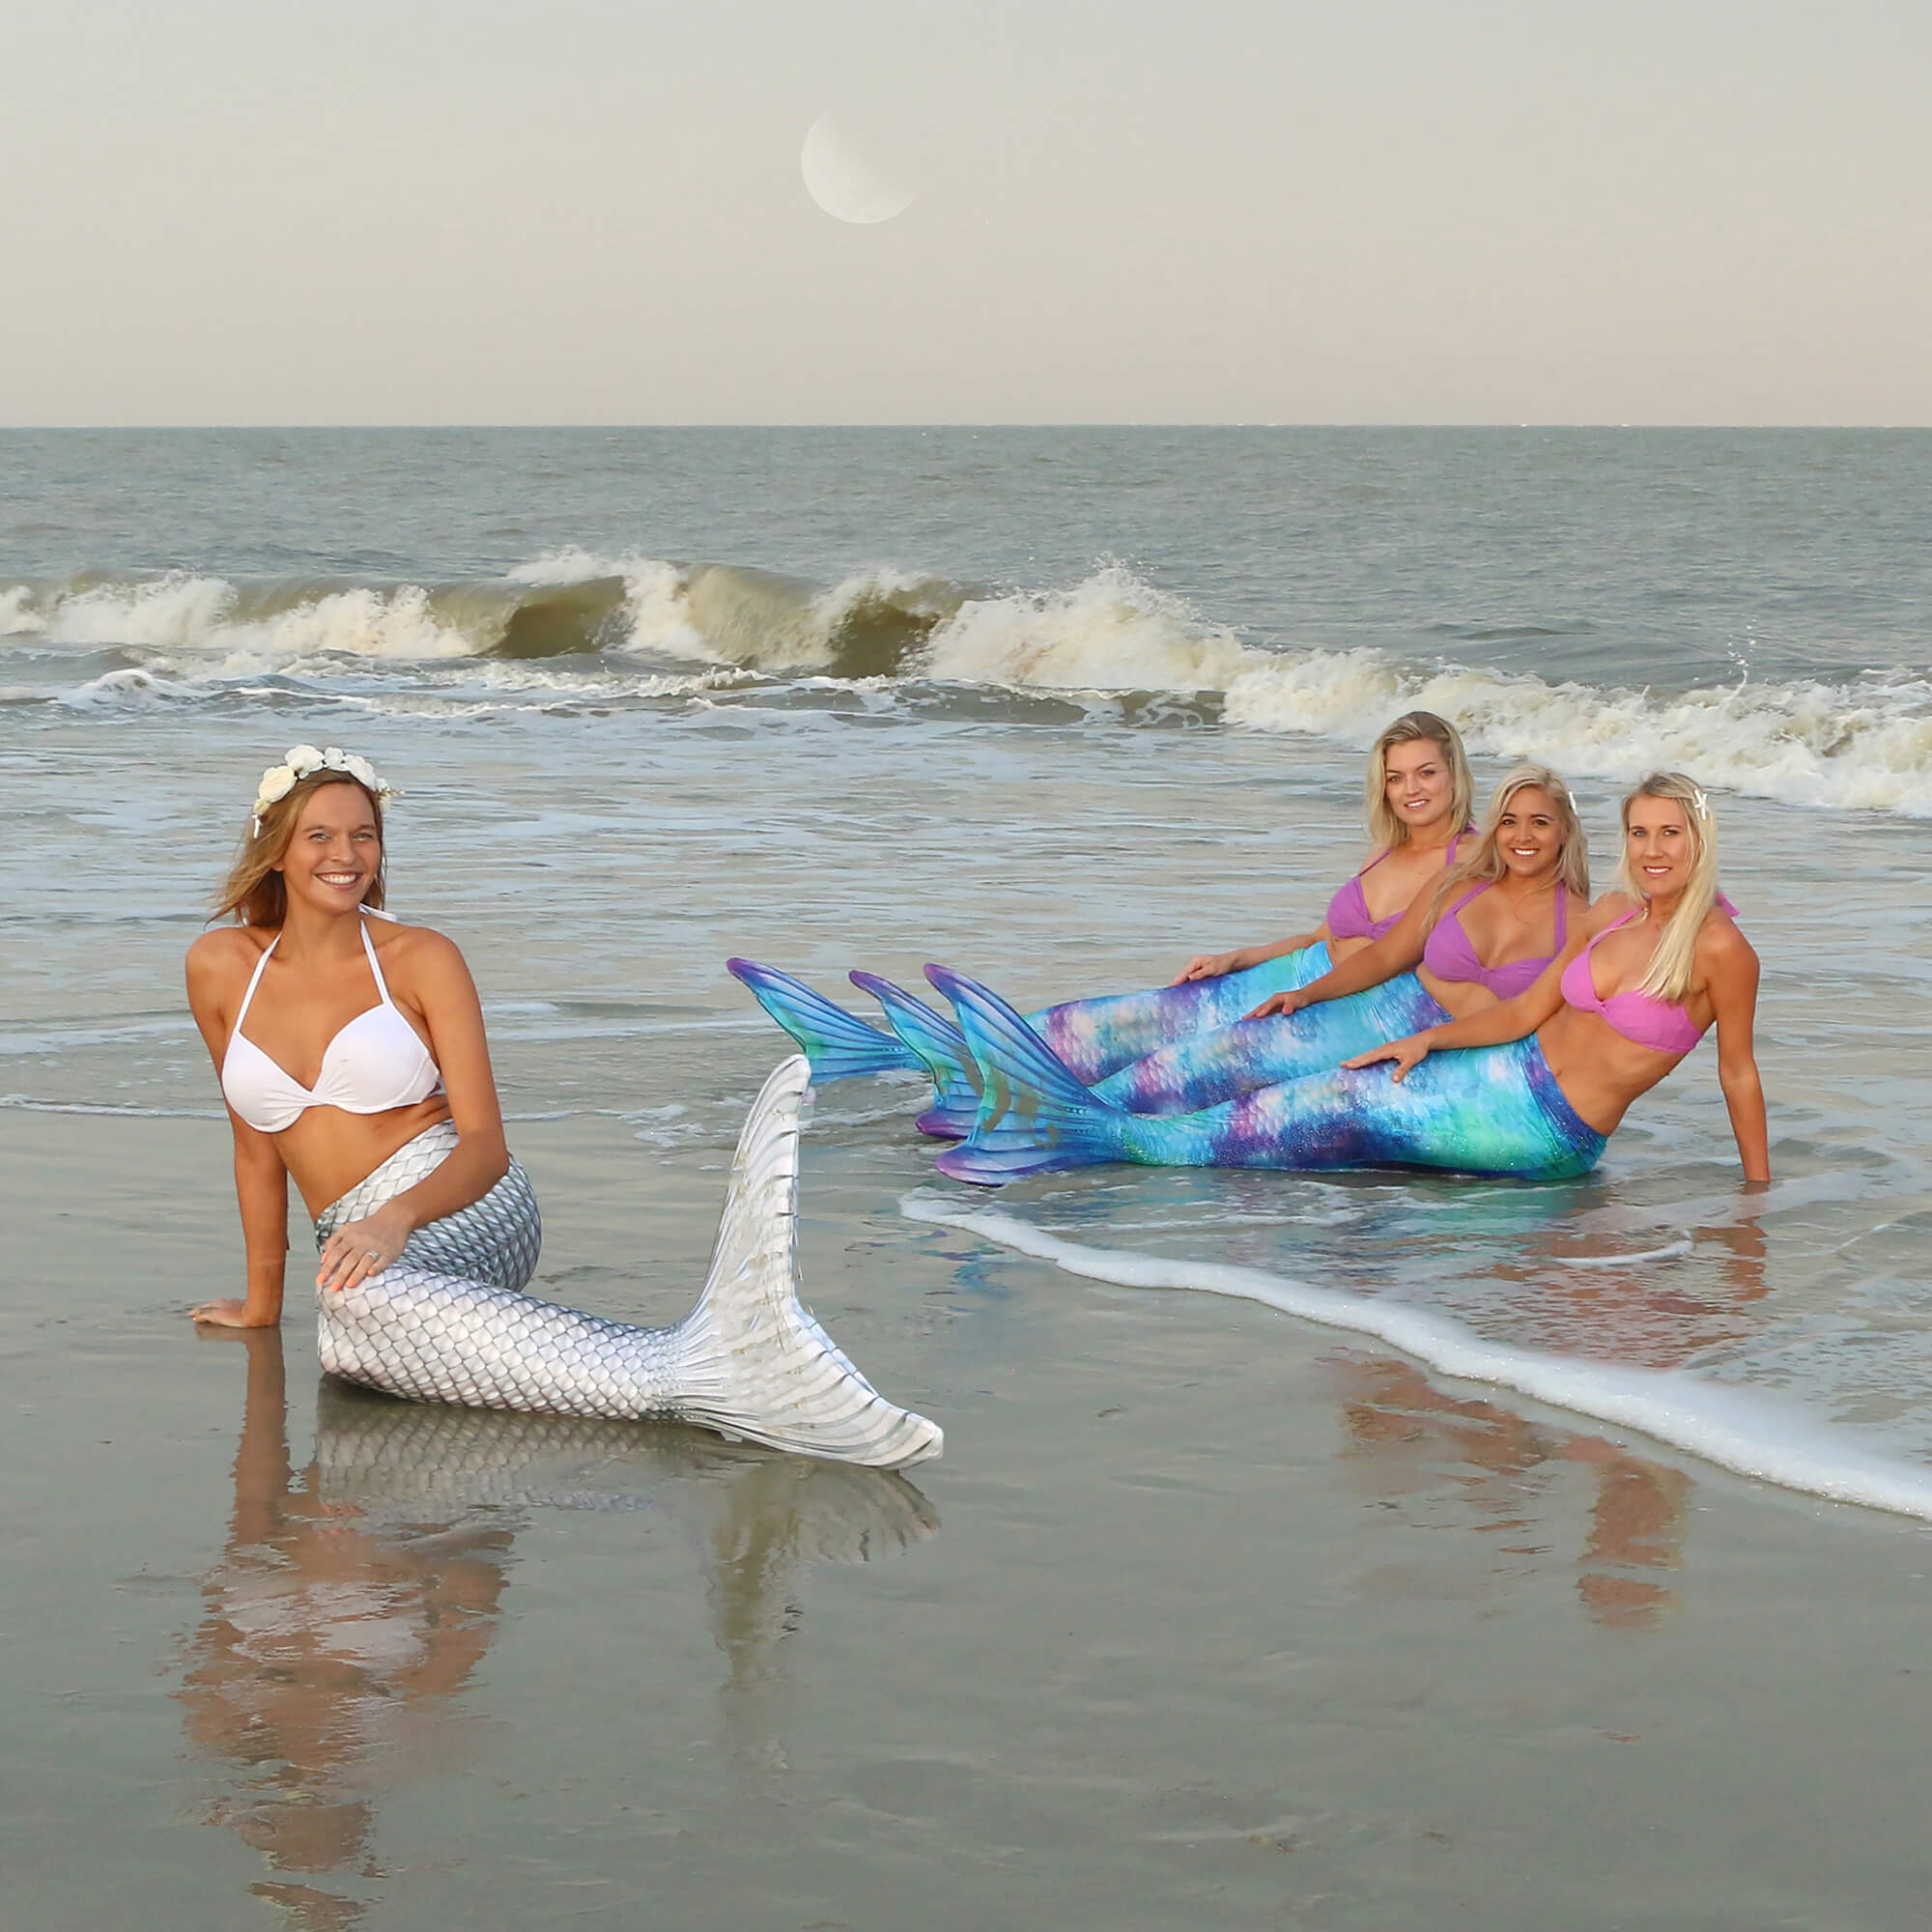 Mermaid Photography for a Bachelorette Party